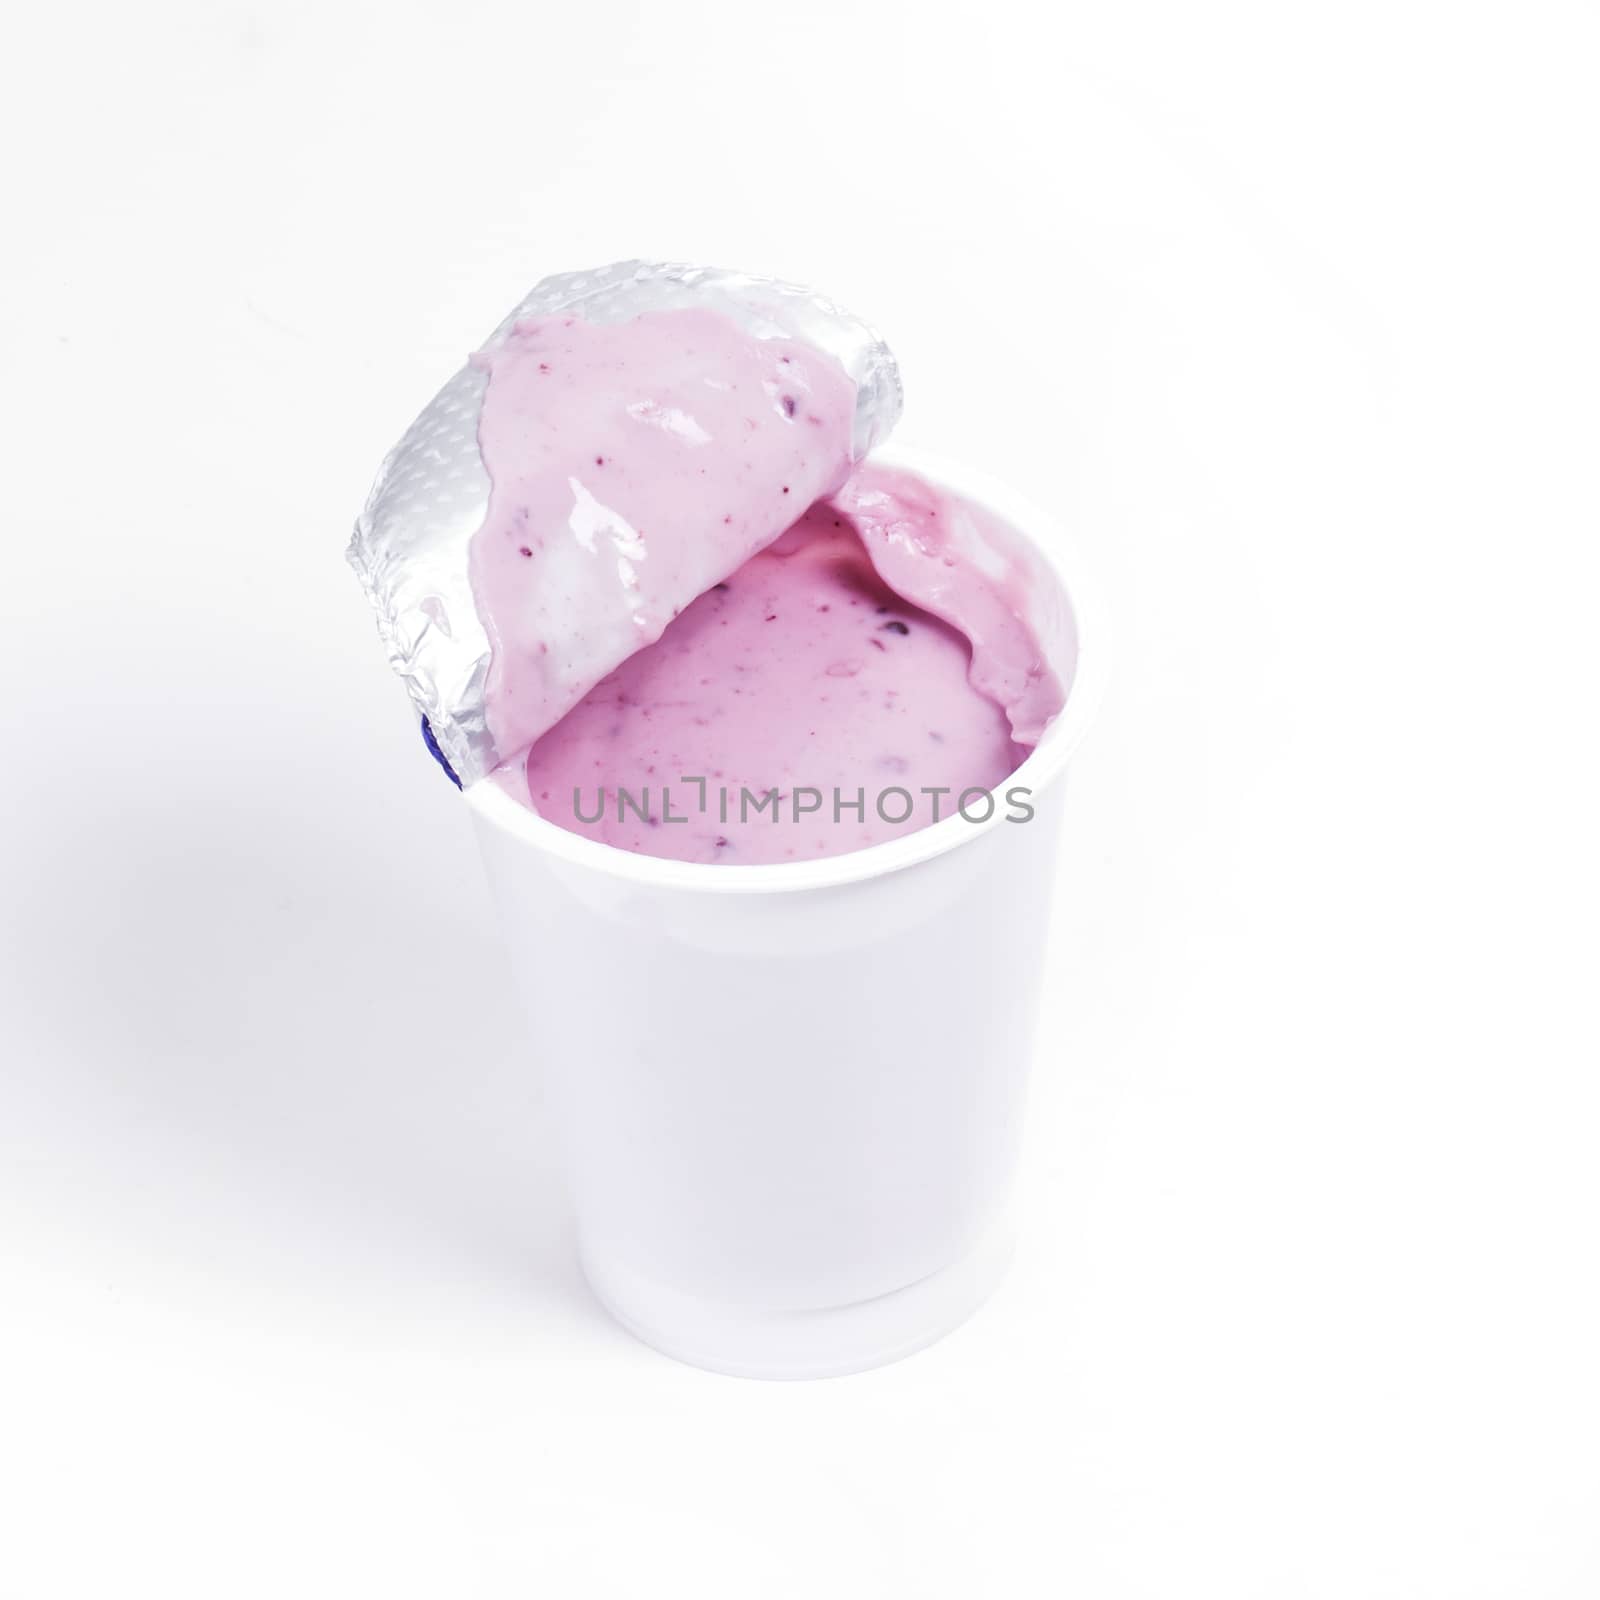 Delicious blueberry yoghurt on a white background